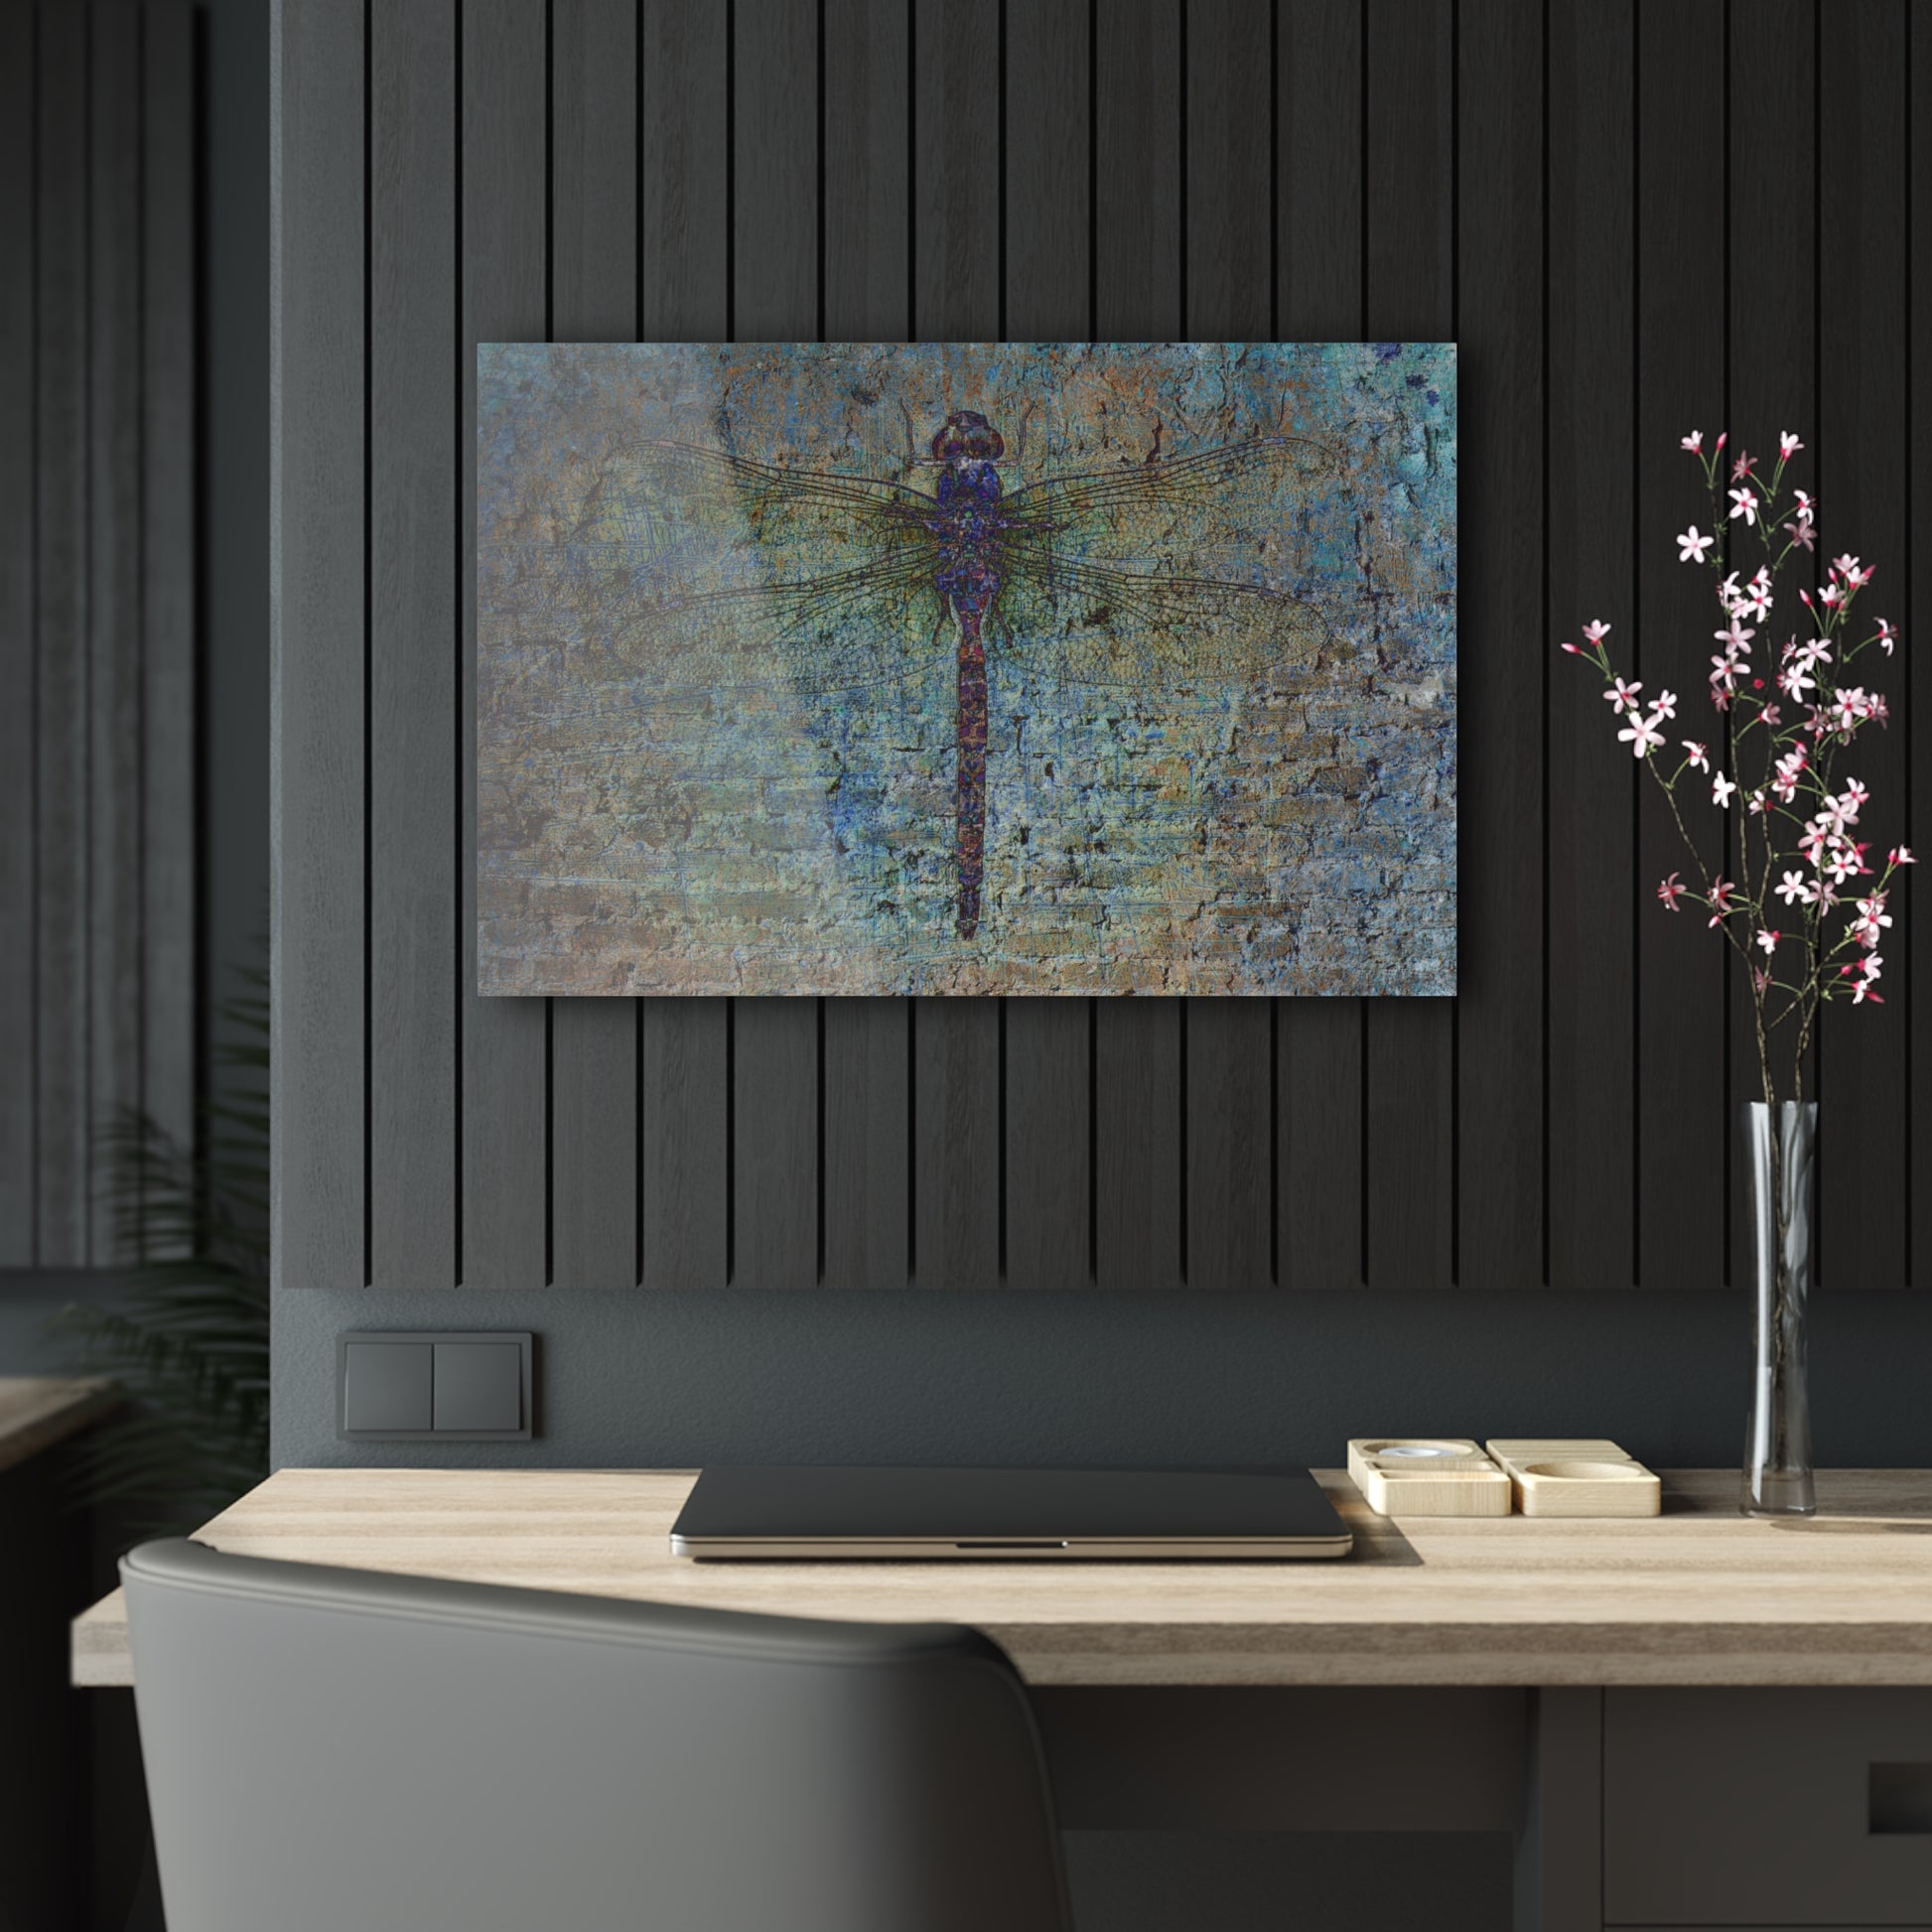 Dragonfly on Distressed Multicolor Brick Wall Printed on a Crystal Clear Acrylic Panel 30x20 hung in dark wall